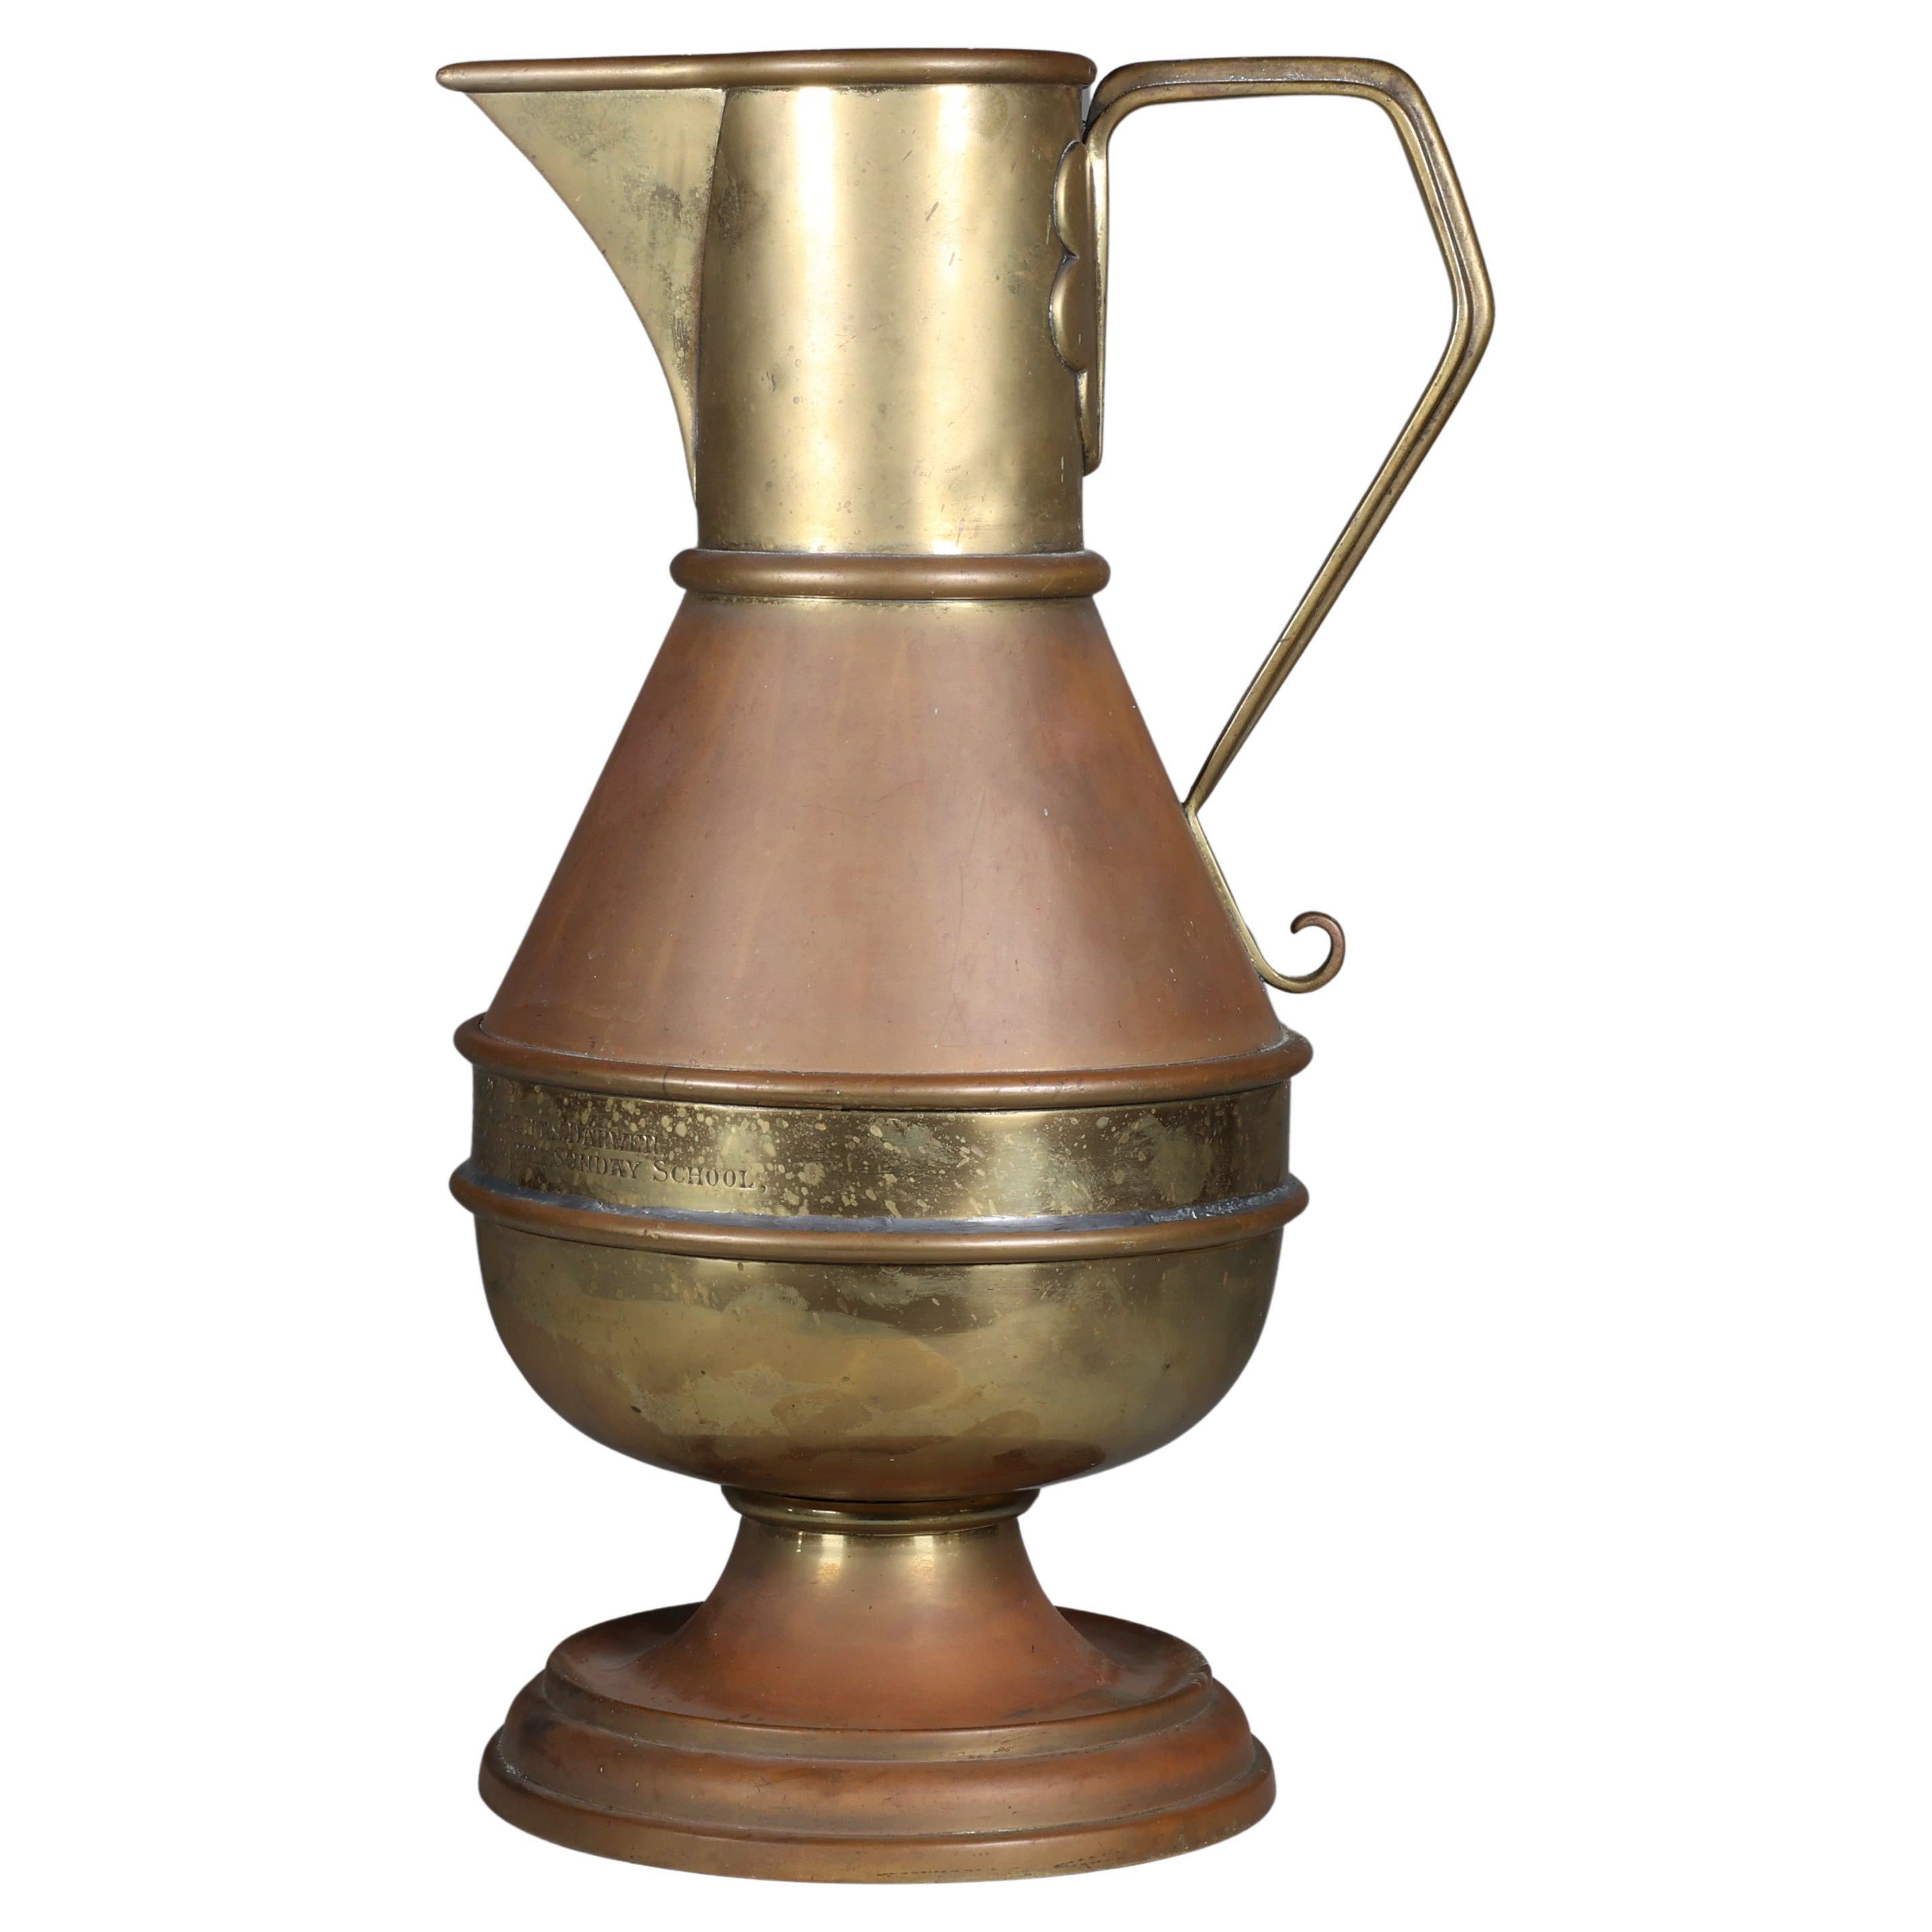 Jones & Willis Gothic Revival brass jug from the Church of St Barnabas of Darwen For Sale